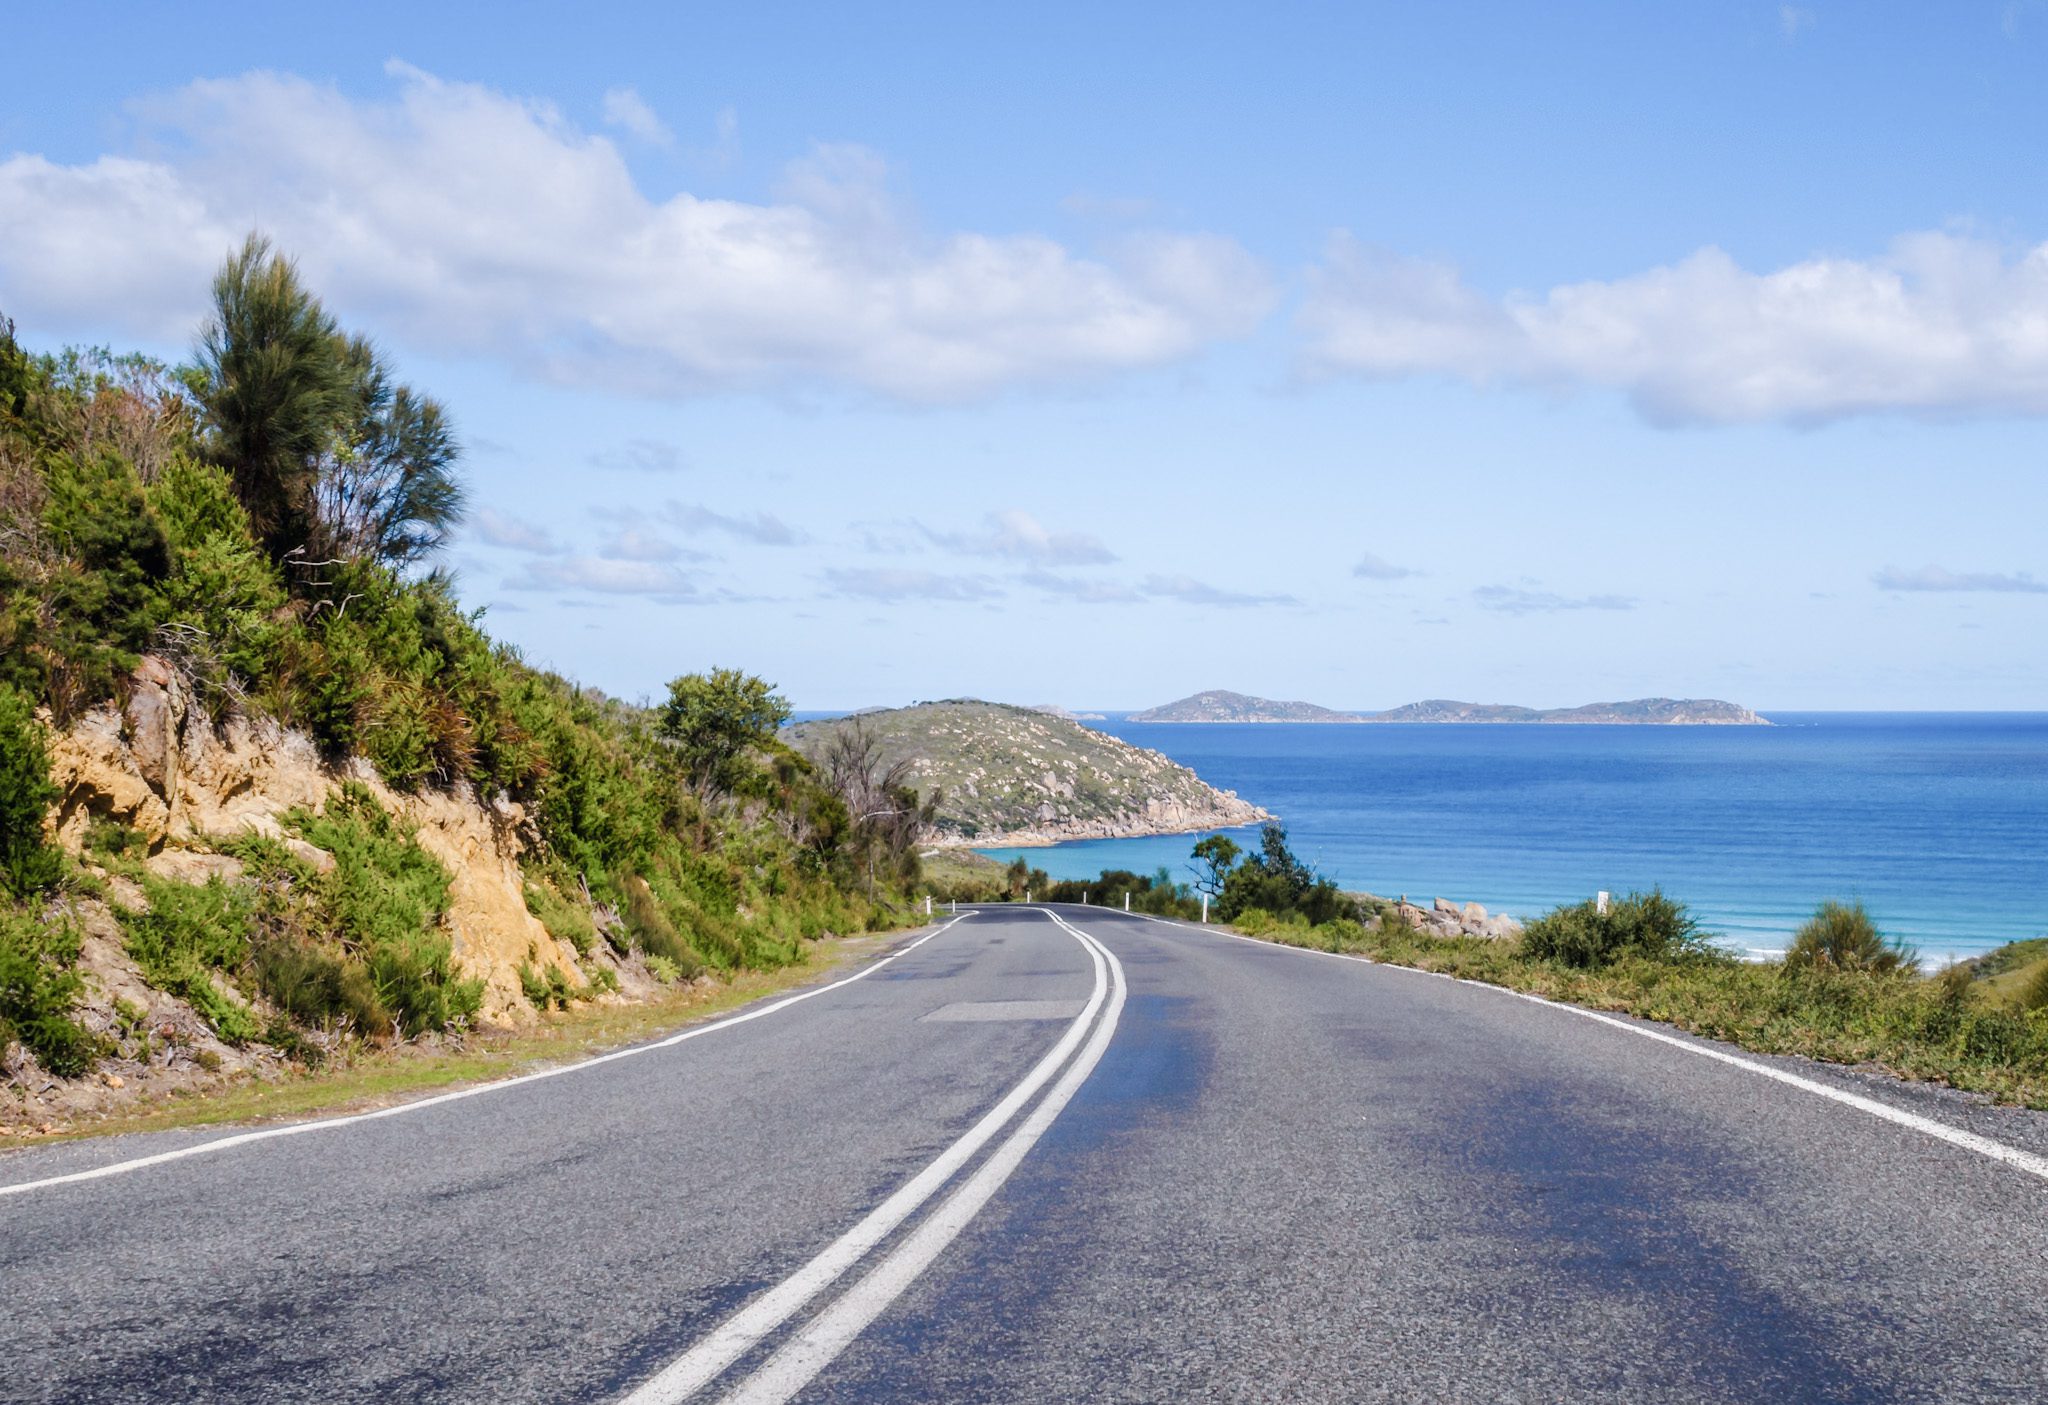 Plan the perfect road trip